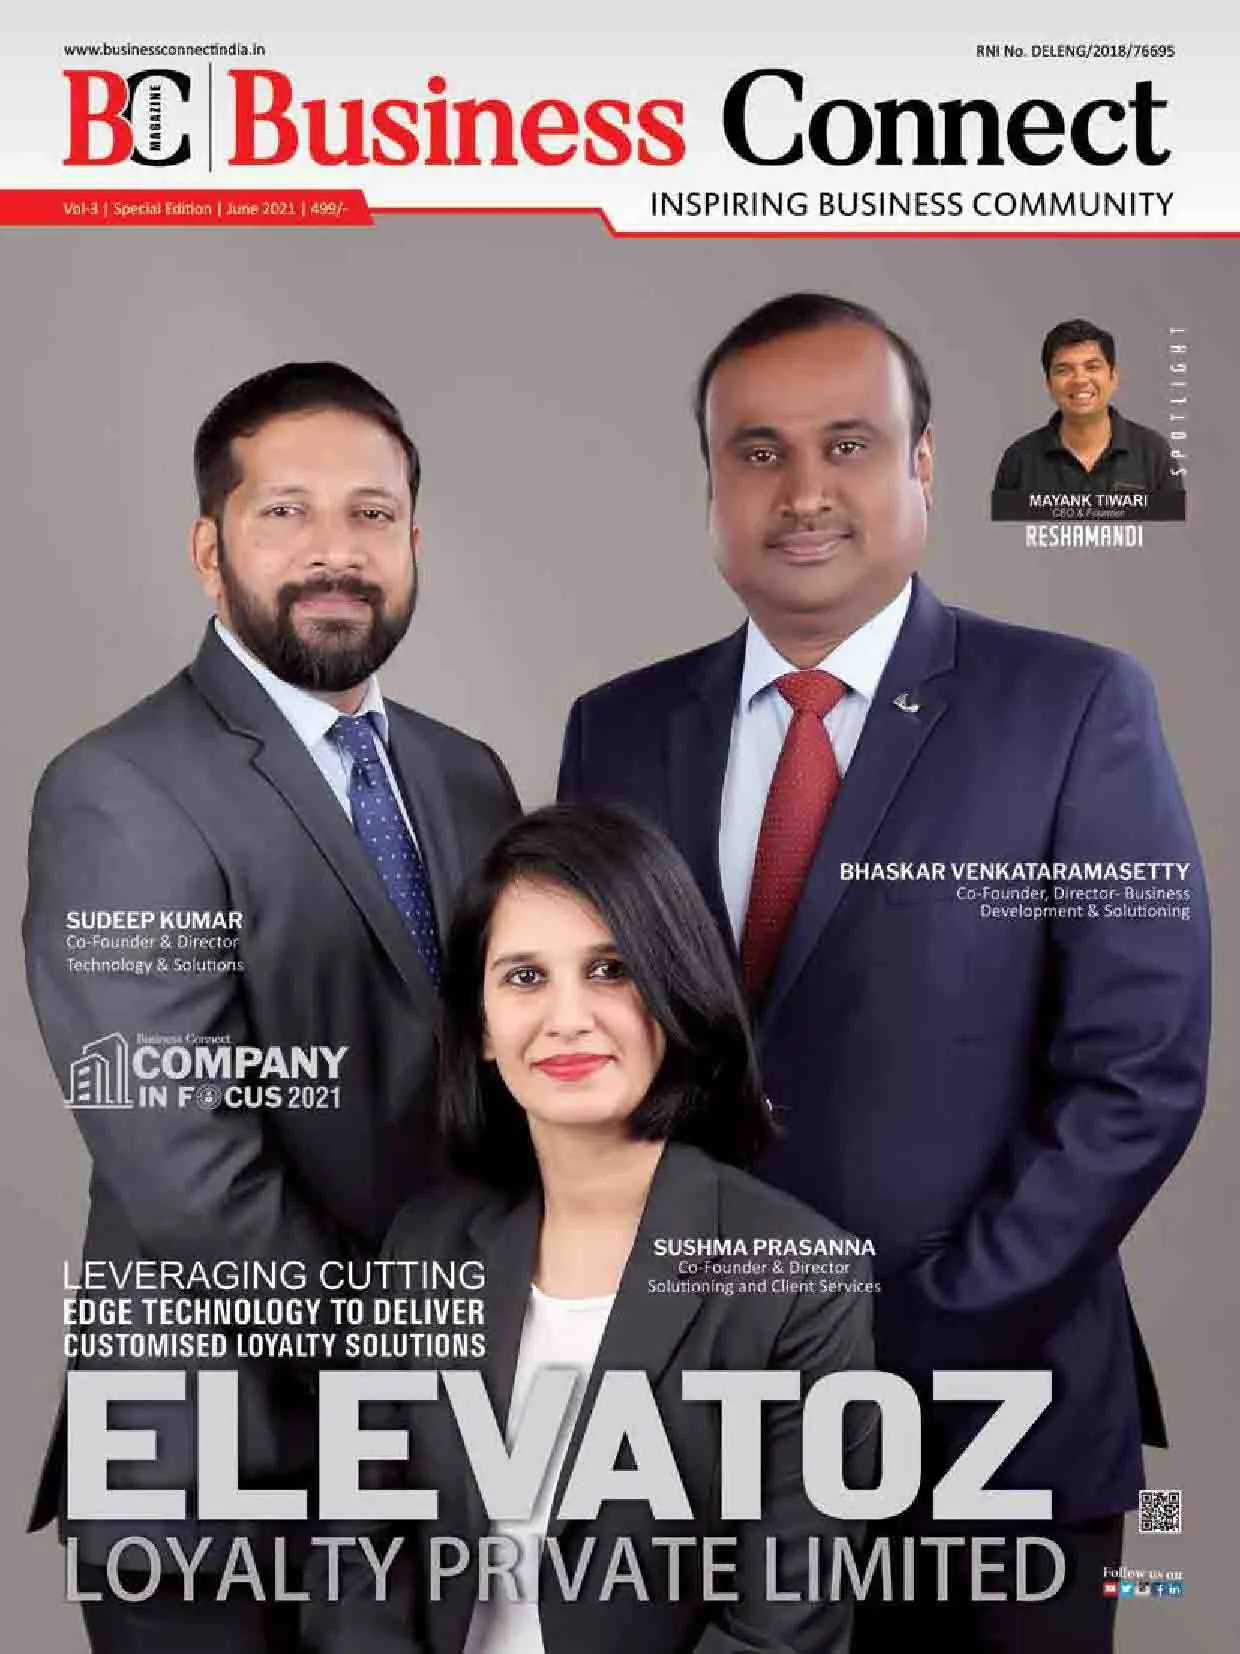 Company in focus 2021 Special Edition page 001 Business Connect Magazine